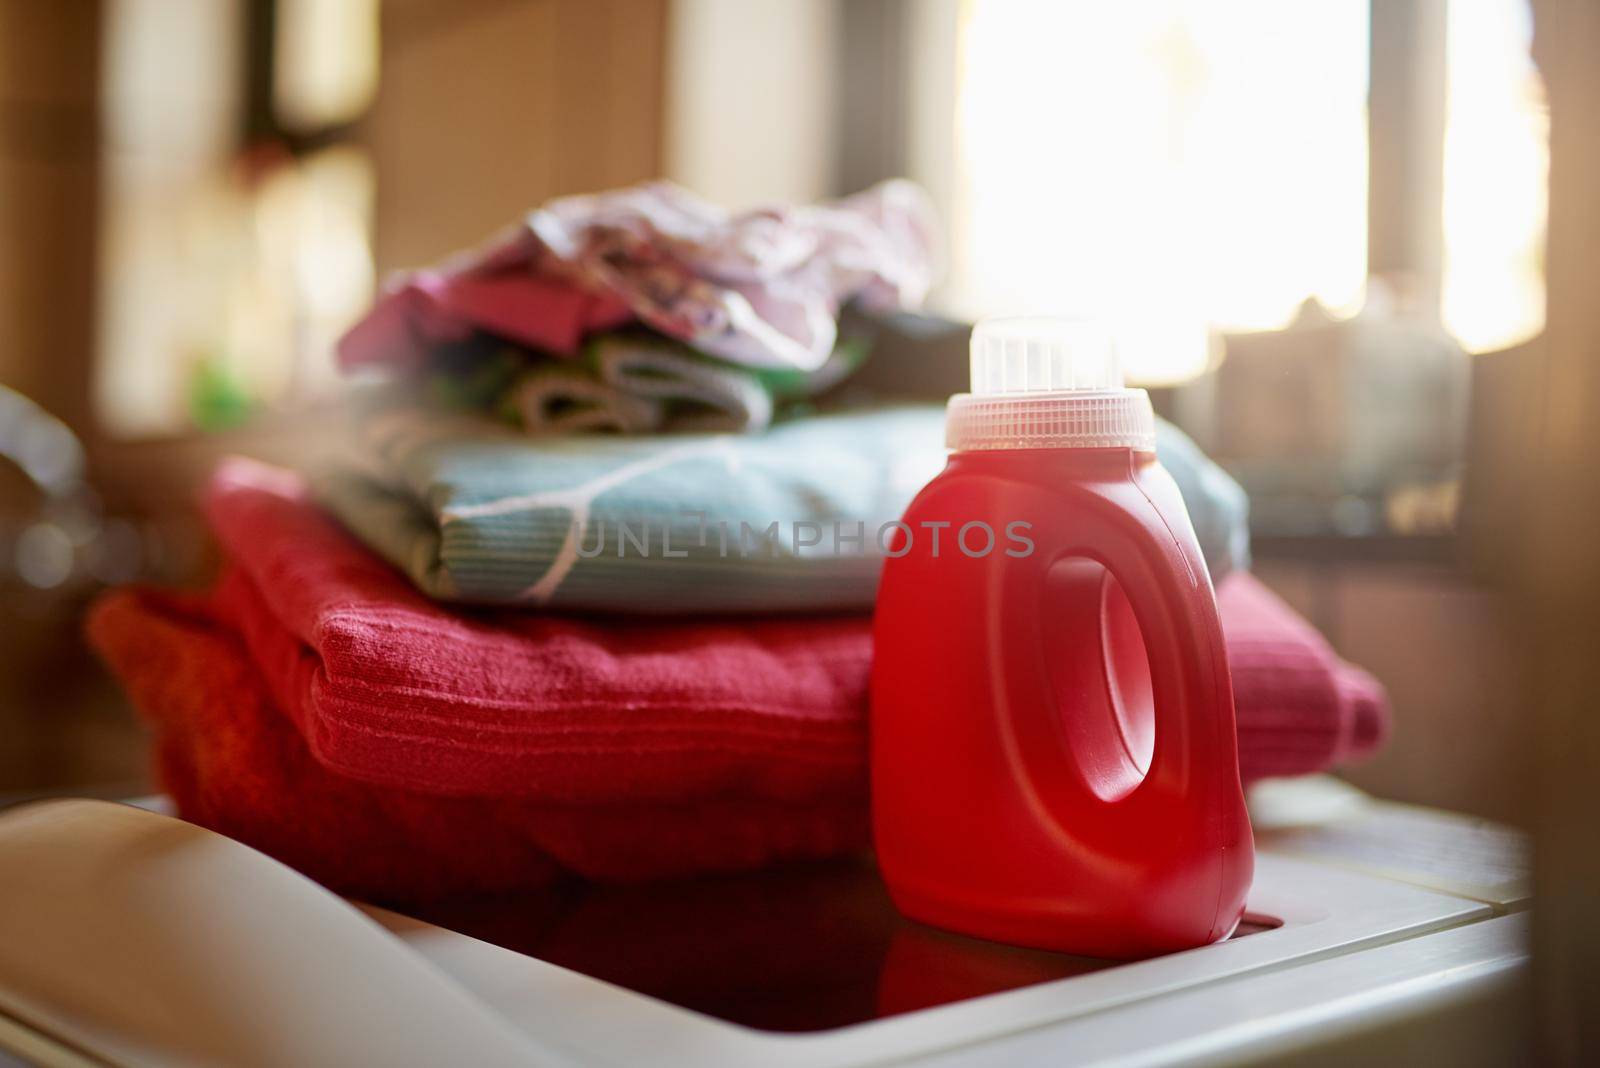 Keeping your laundry clean. Shot of a bottle of detergent and a pile of laundry on top of a washing machine. by YuriArcurs